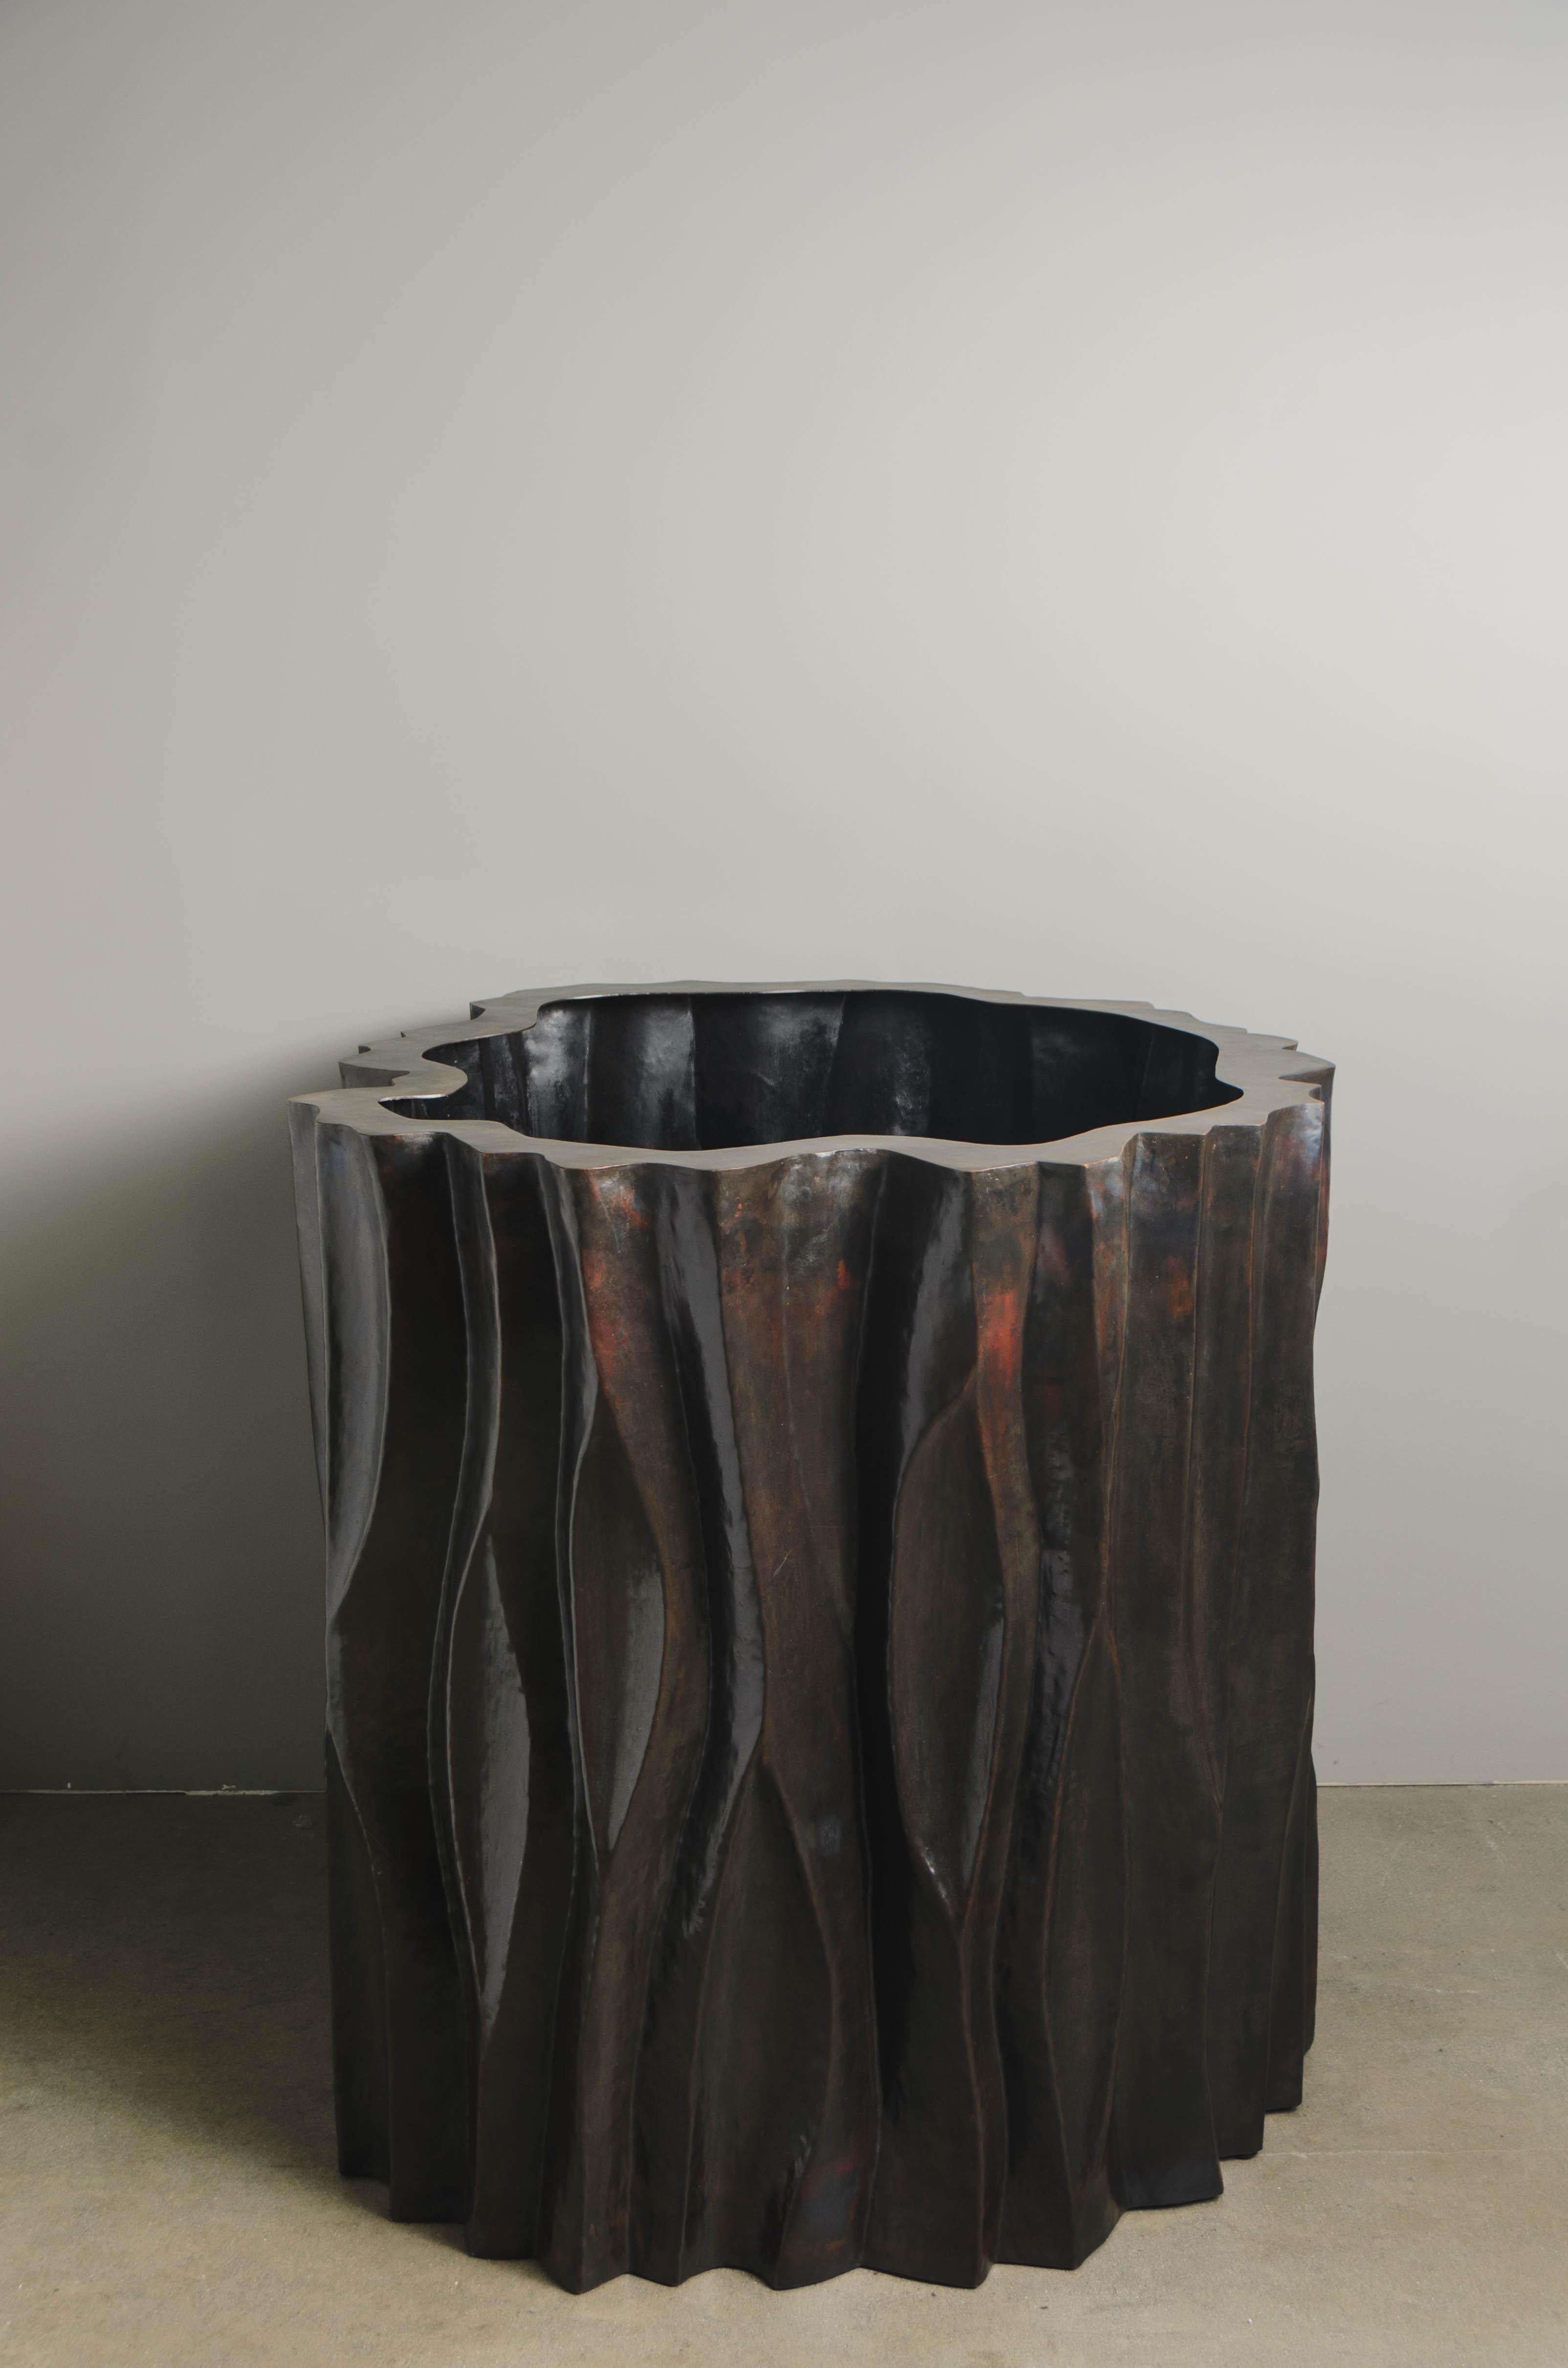 Contemporary Repoussé Large Tree Trunk Pot in Dark Antique Copper by Robert Kuo For Sale 7